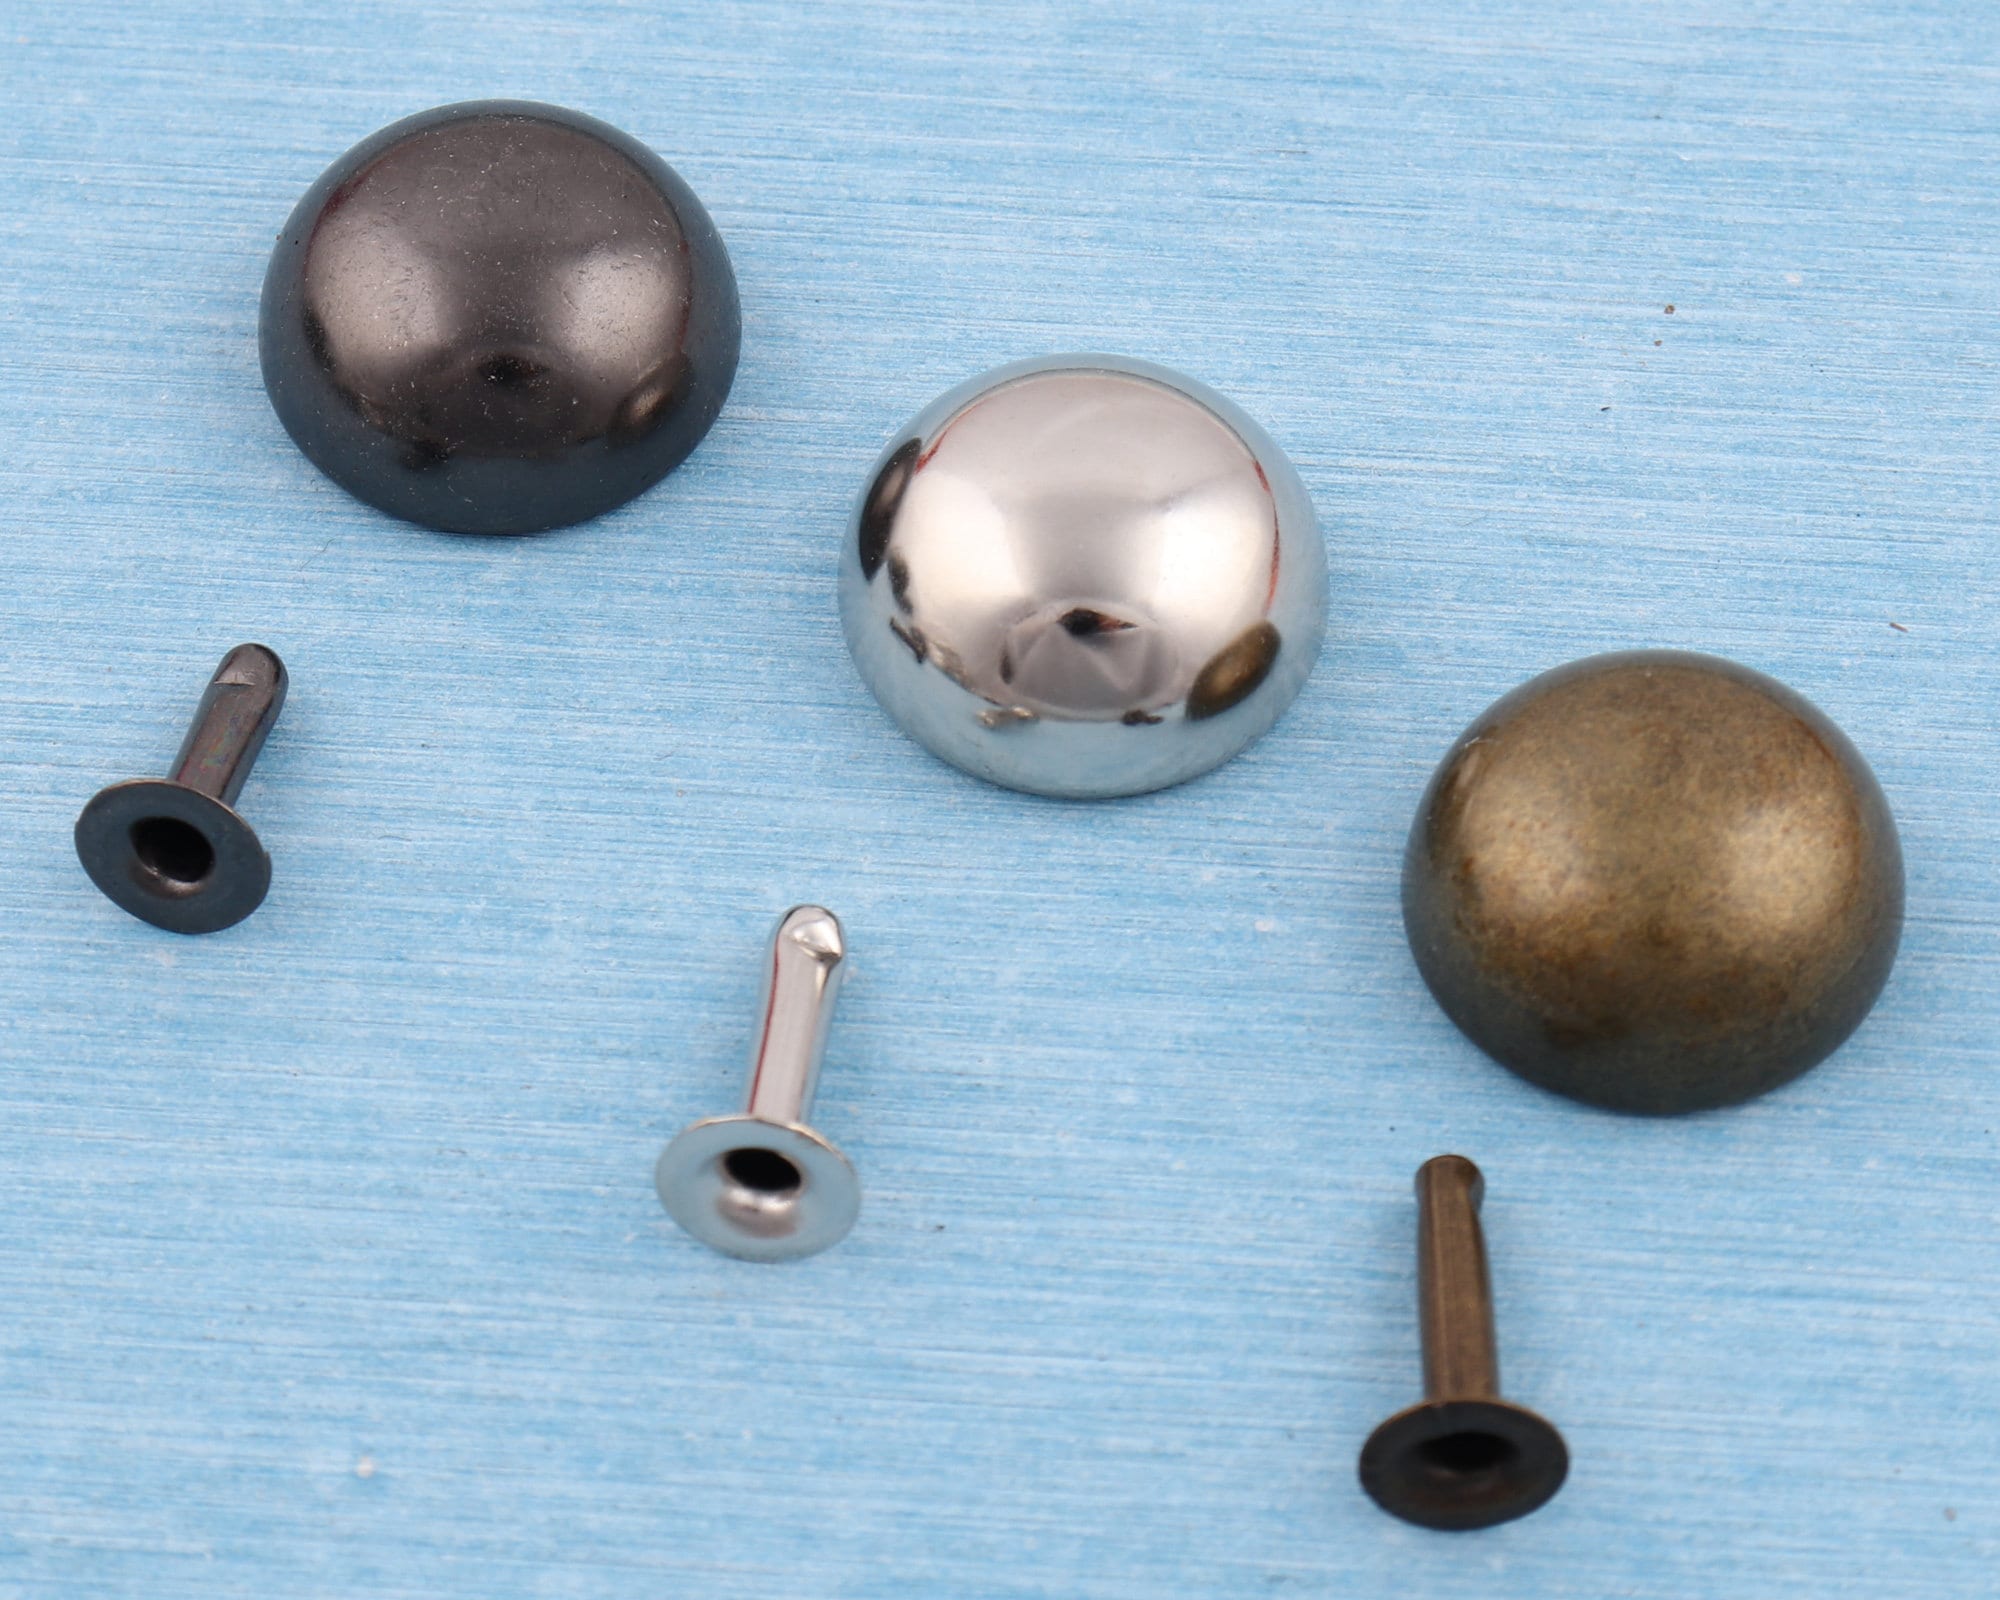 Stainless Steel Rivets, Double Cap Rivets, Rivets for Leather, Rivets for  Biothane, Stainless Fasteners, Type 304 Stainless Rivets, 